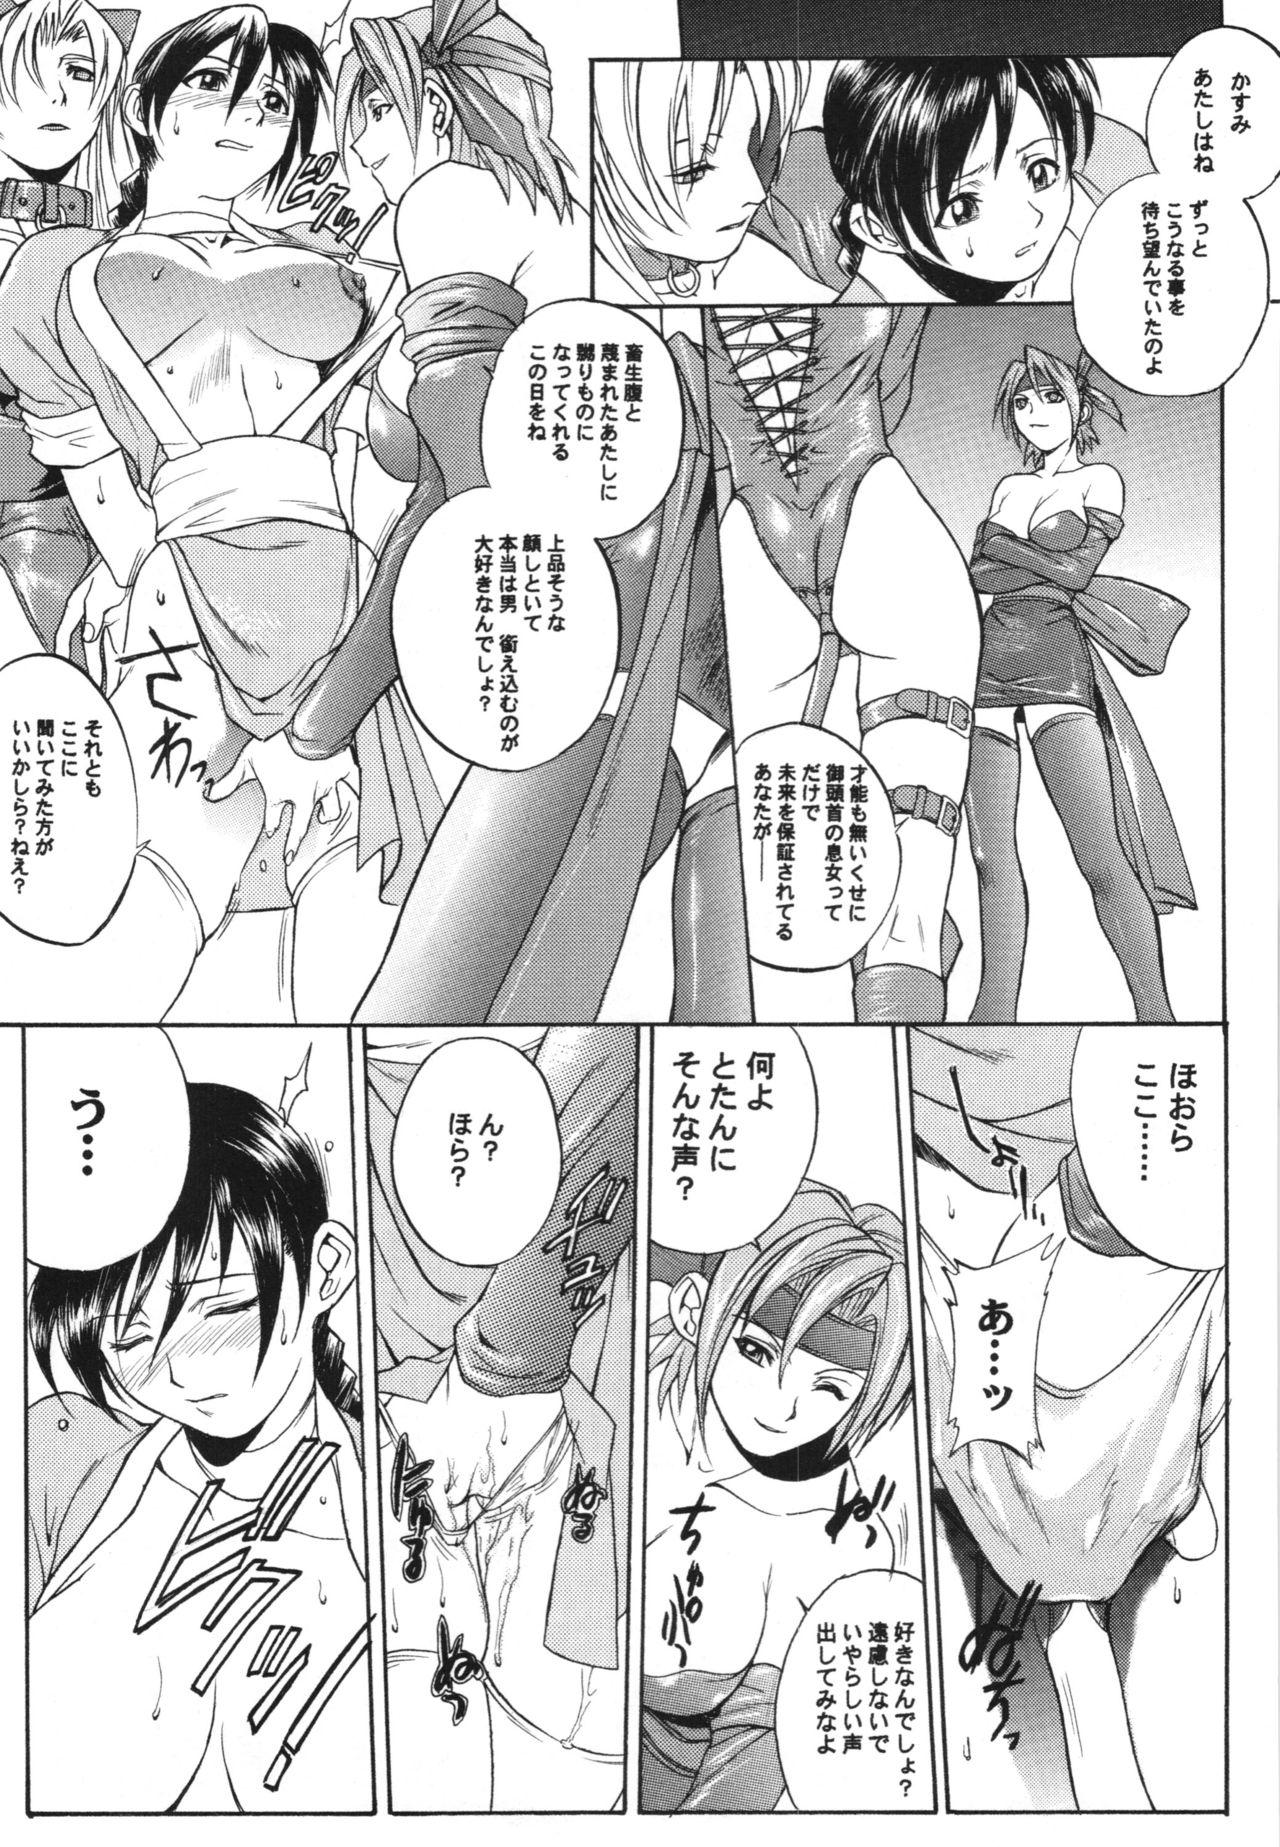 Pussylick WAY OF TEX-MEX Soushuuhen 3 + Omakebon - Dead or alive To heart Xenosaga Roludo - Page 11